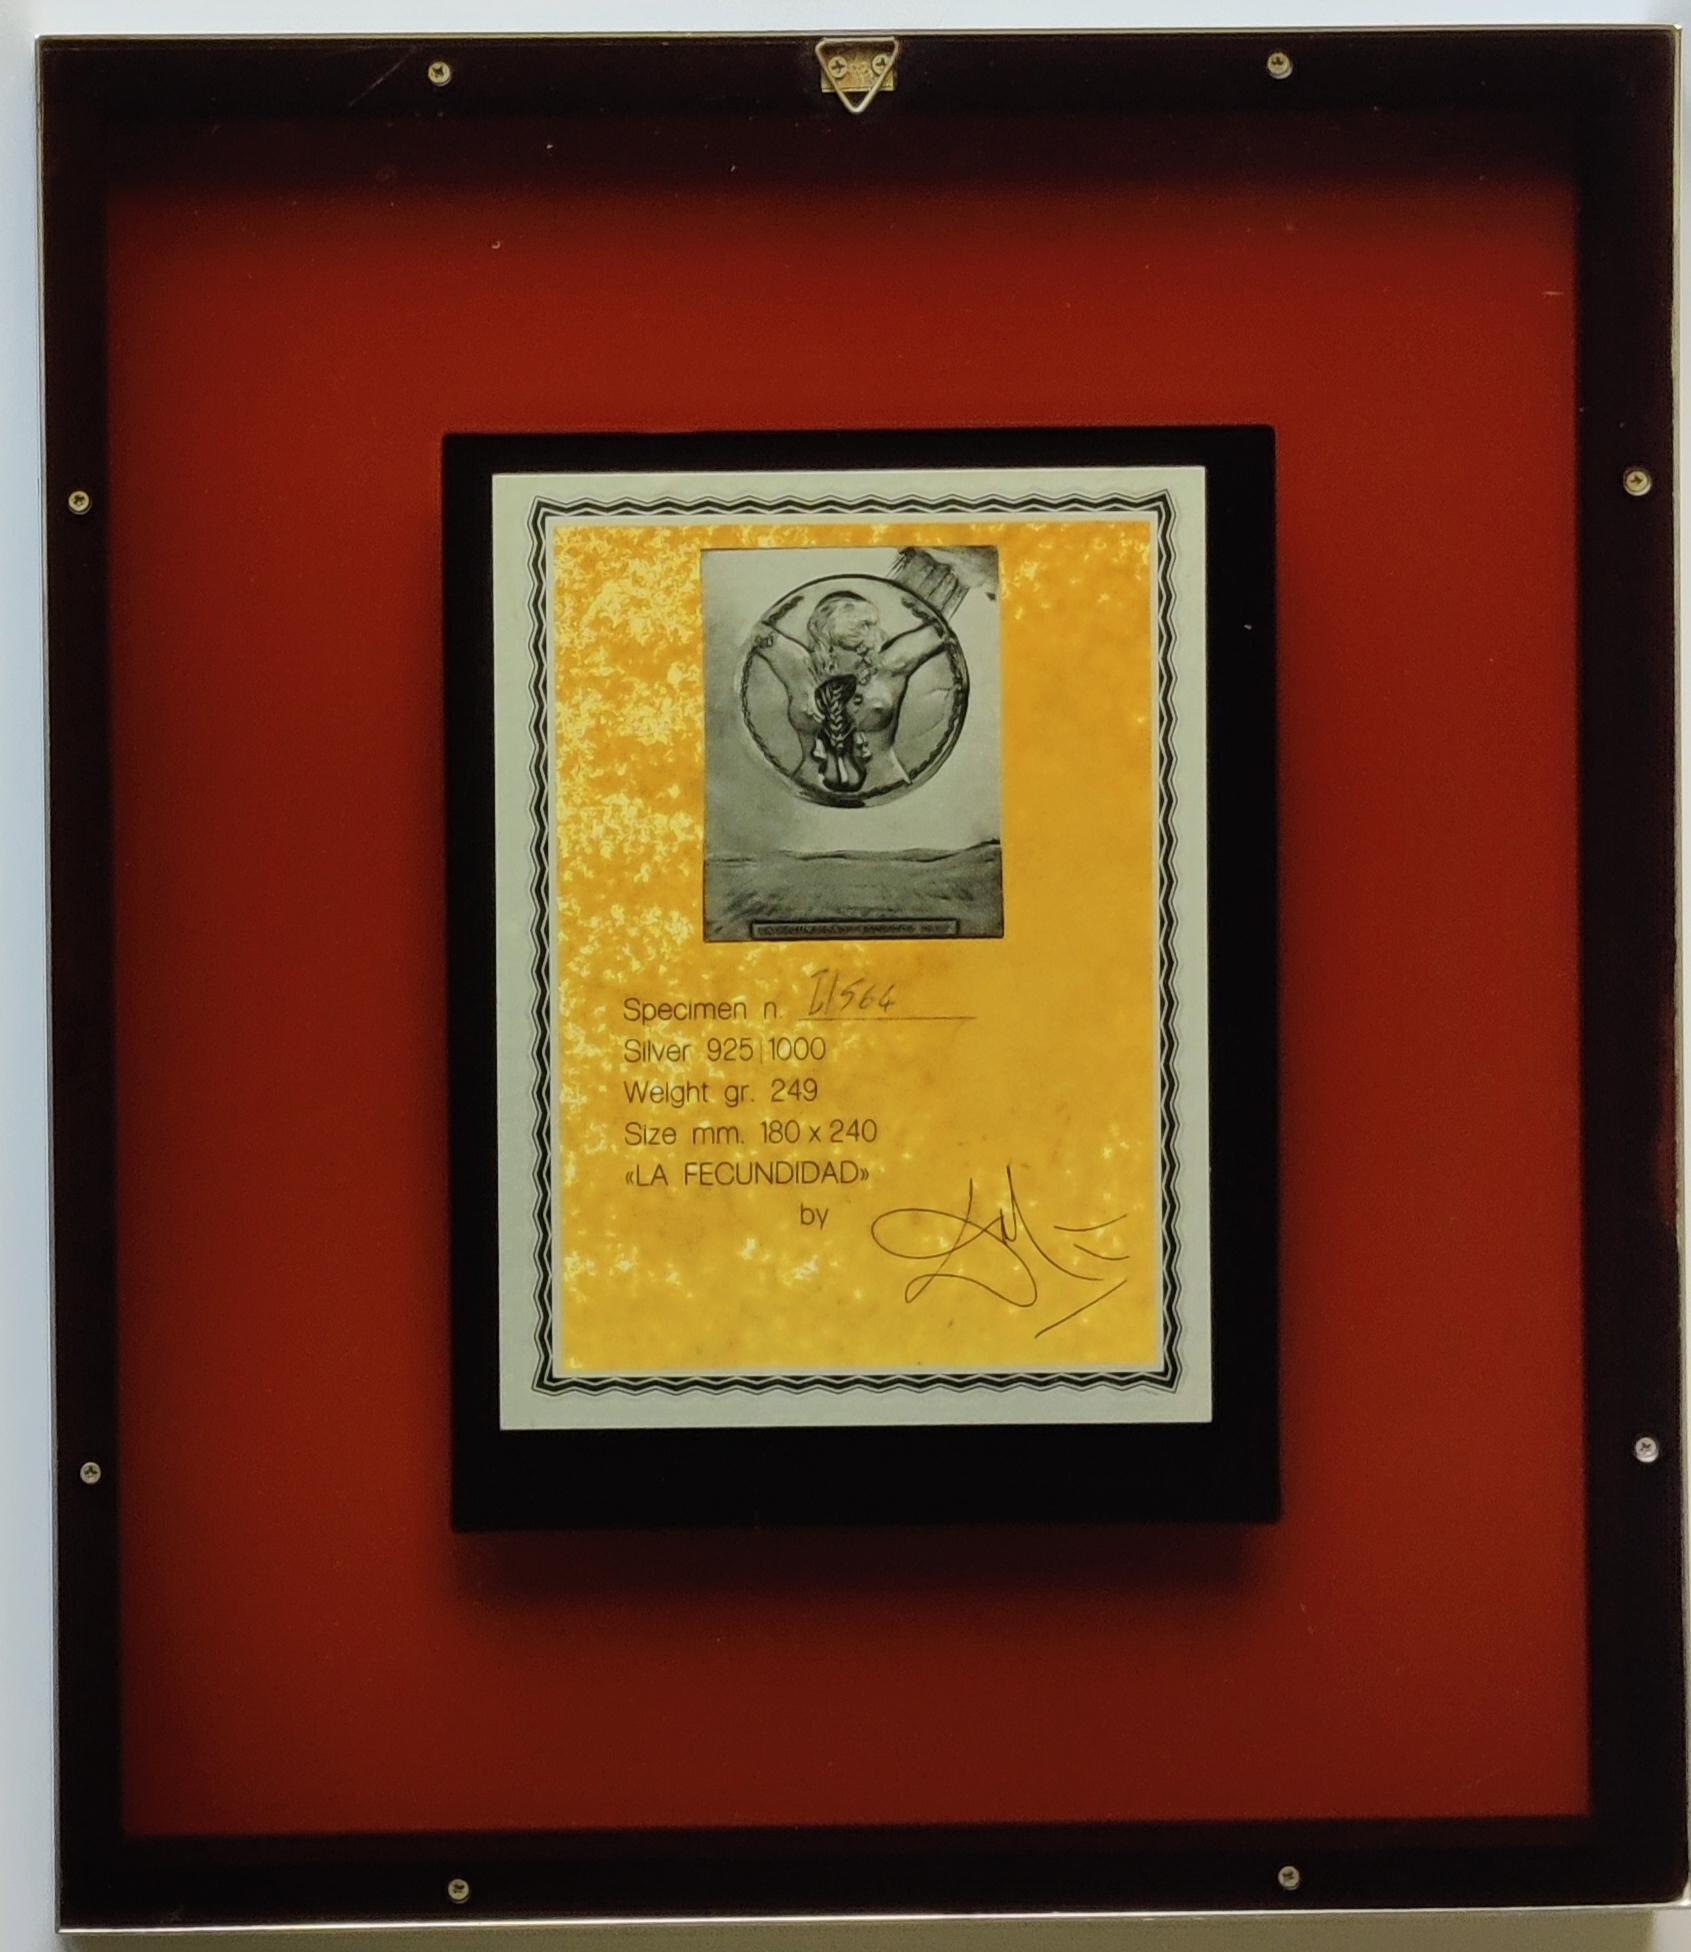 Salvador Dali 
Fecundity - Bas Relief Silver Sculpture, 1977
Dimensions: 24 x 18 cm
Framed: 38 x 33 cm
Signed on the bas relief and printed signature on the certificate on the back.
Edition number: I/564
This limited edition plaque was mounted to